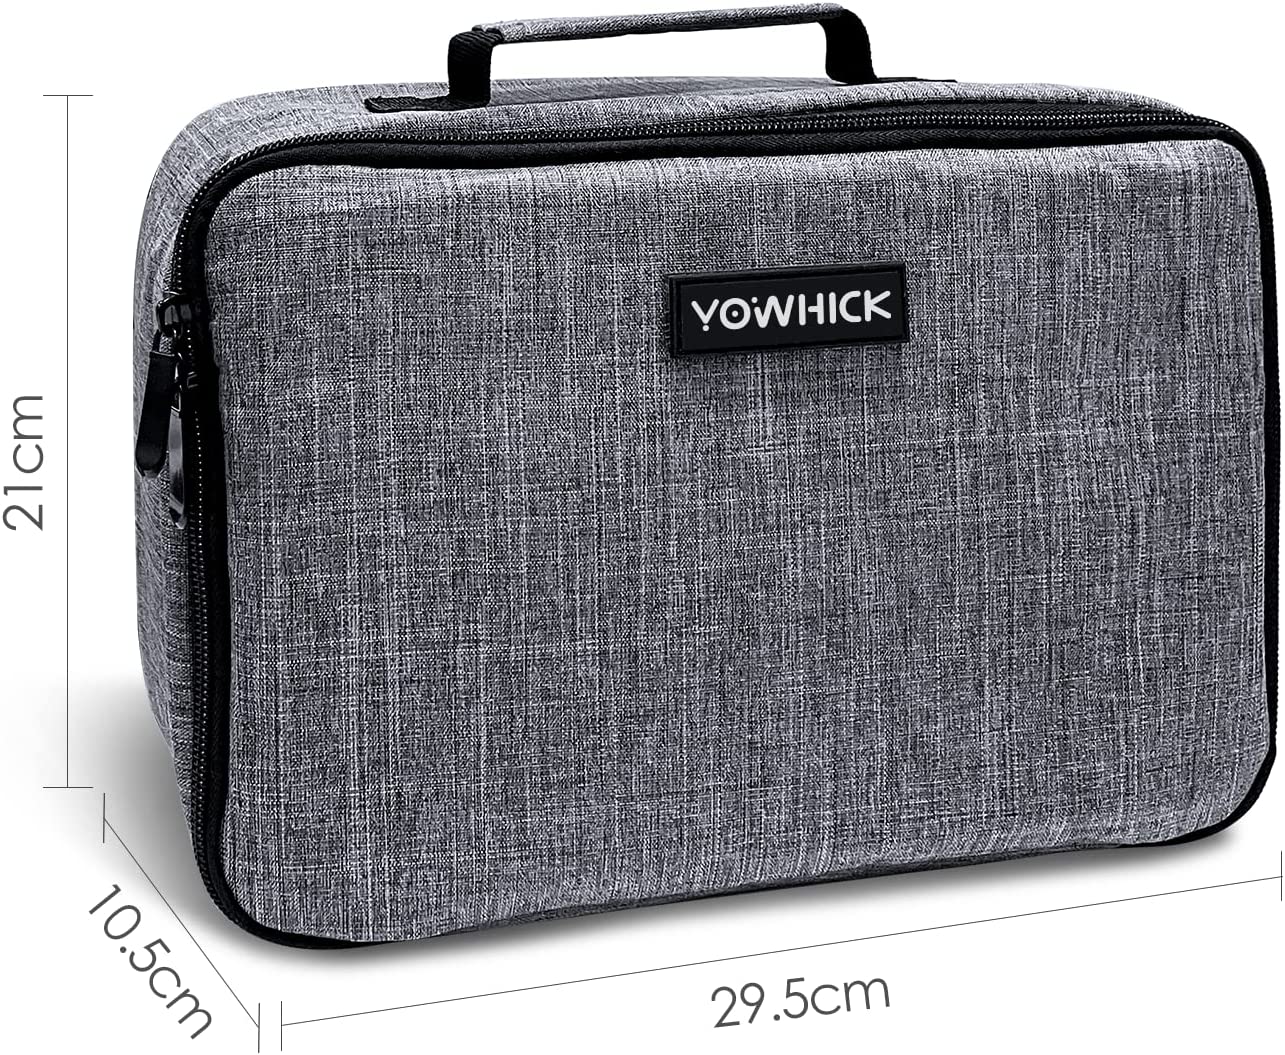 YOWHICK Projector Case, Projector Travel Carrying Bag Compatible with YOWHICK DP01, GDP1, DP03, More Movie Projector - Scratch Resistant & Compartment Dividers, 10.8"x7.7"x3.6" - YOWHICK